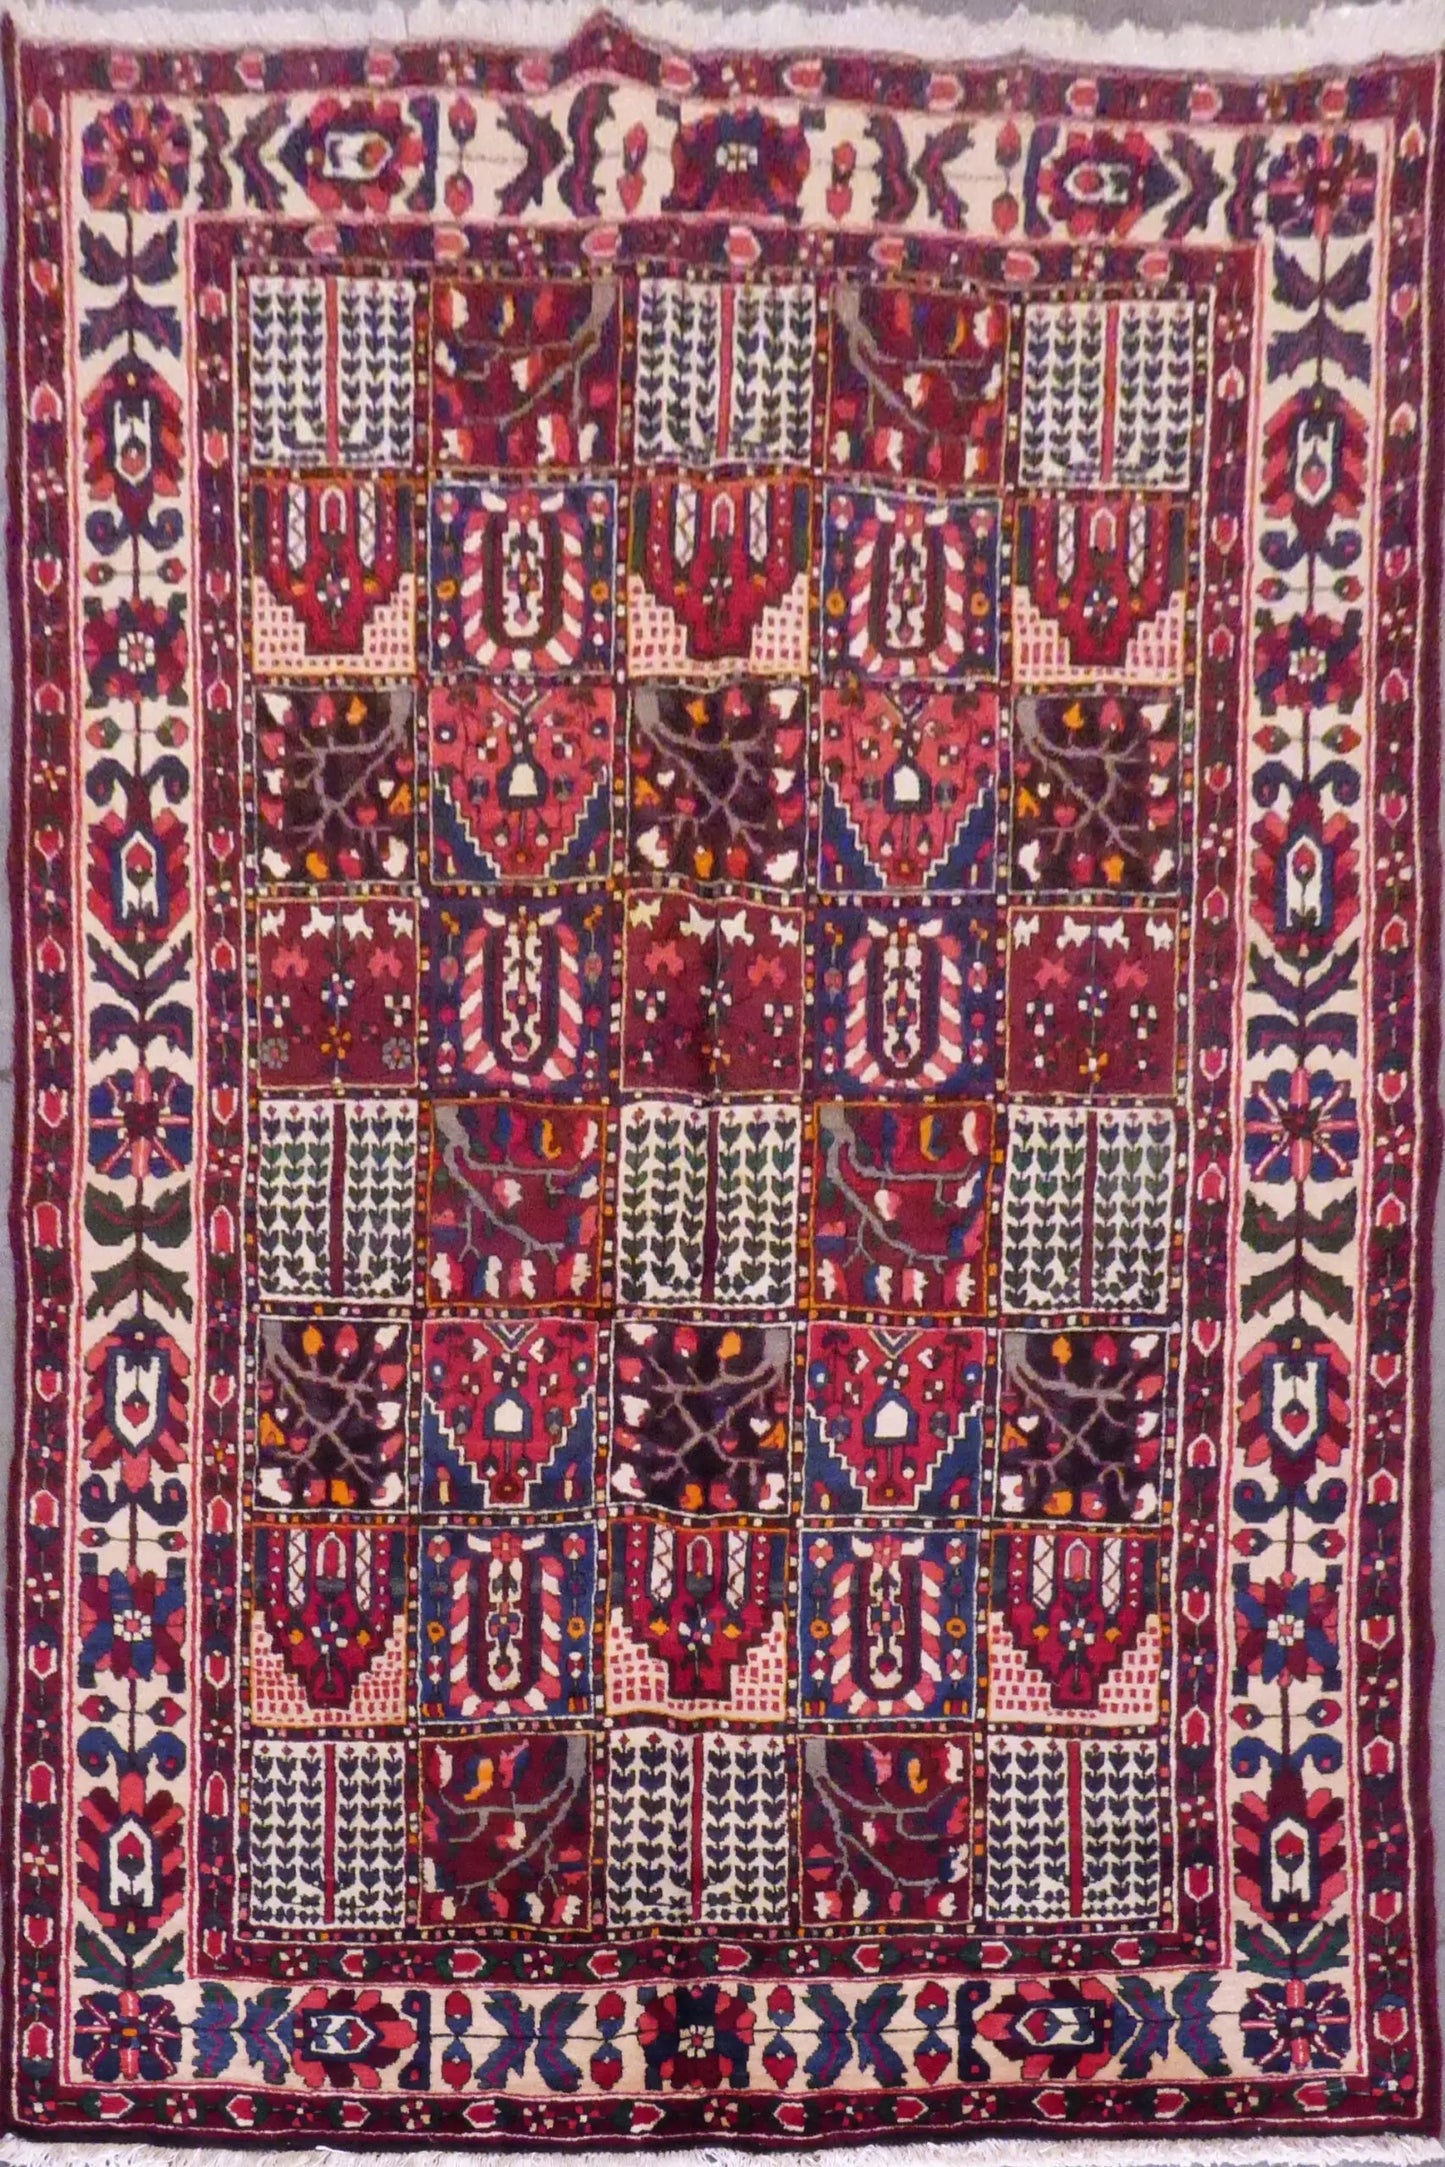 Hand-Knotted Persian Wool Rug _ Luxurious Vintage Design, 10"2' x 6"9', Artisan Crafted